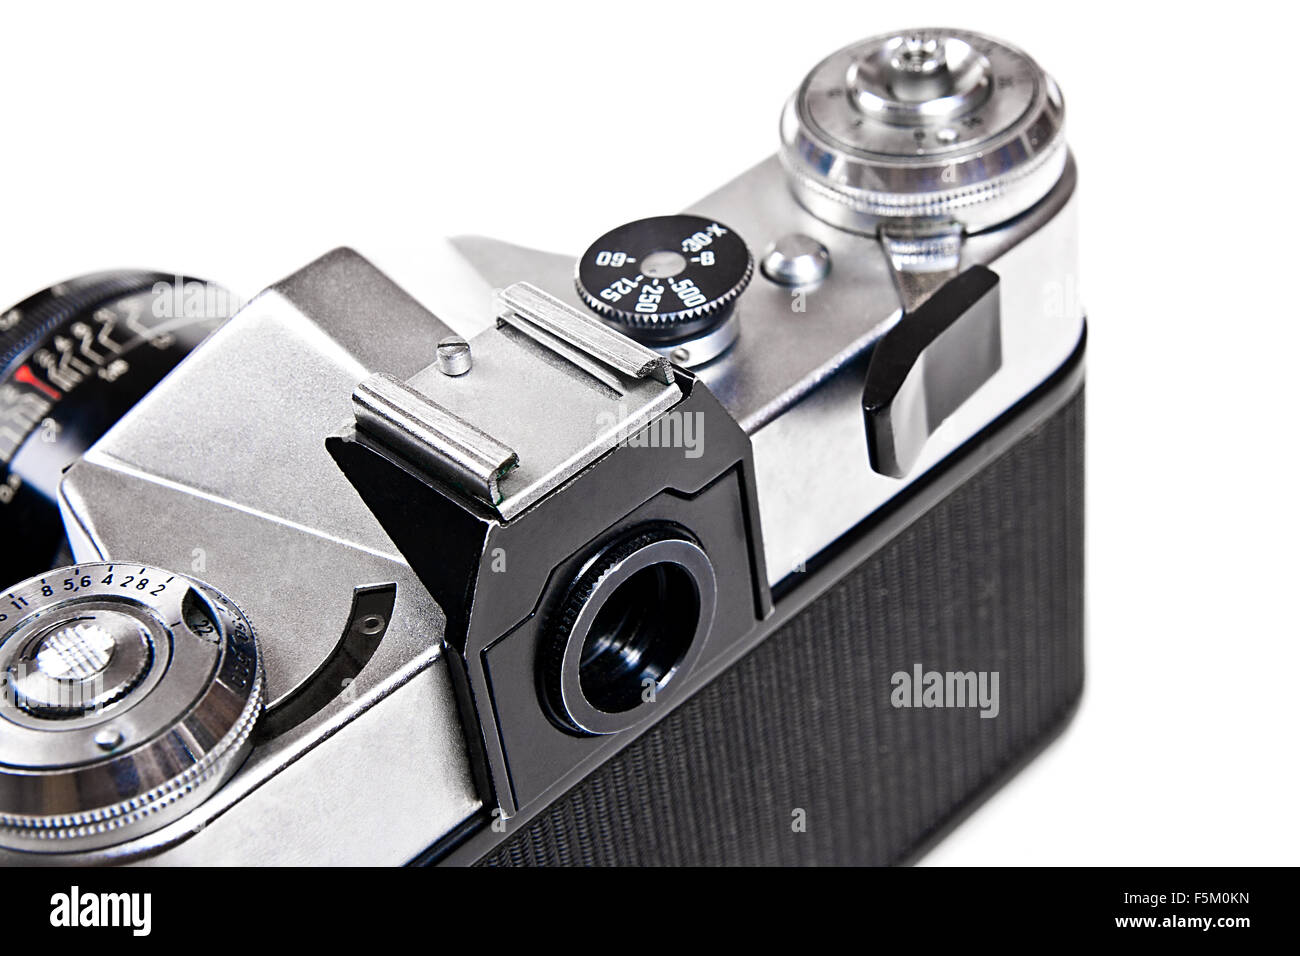 Range finder camera with lens. Close up view part of old retro photo camera. Back view of classic black manual film camera isola Stock Photo